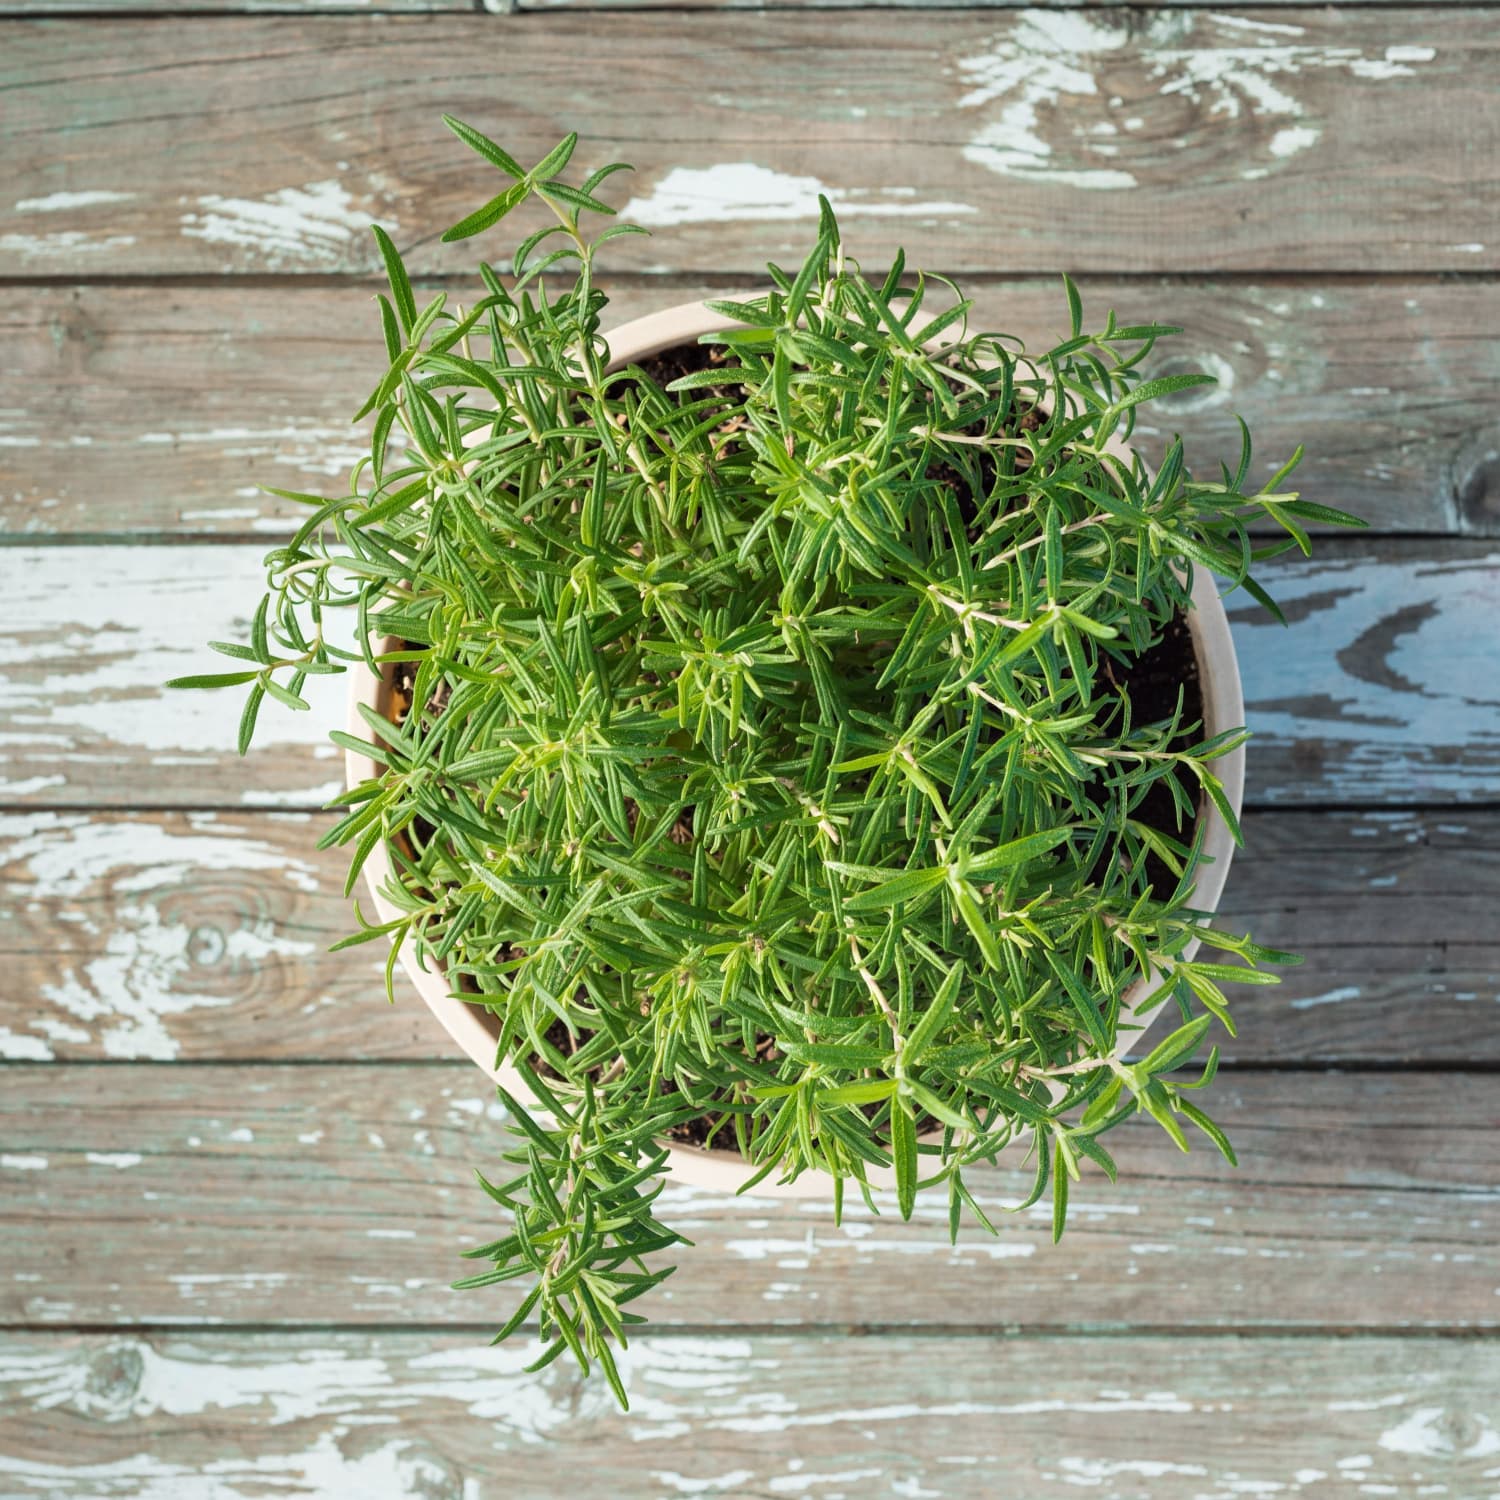 Rosemary Plant Care How To Grow Rosemary Indoors Apartment Therapy,Spanish Coffee Table